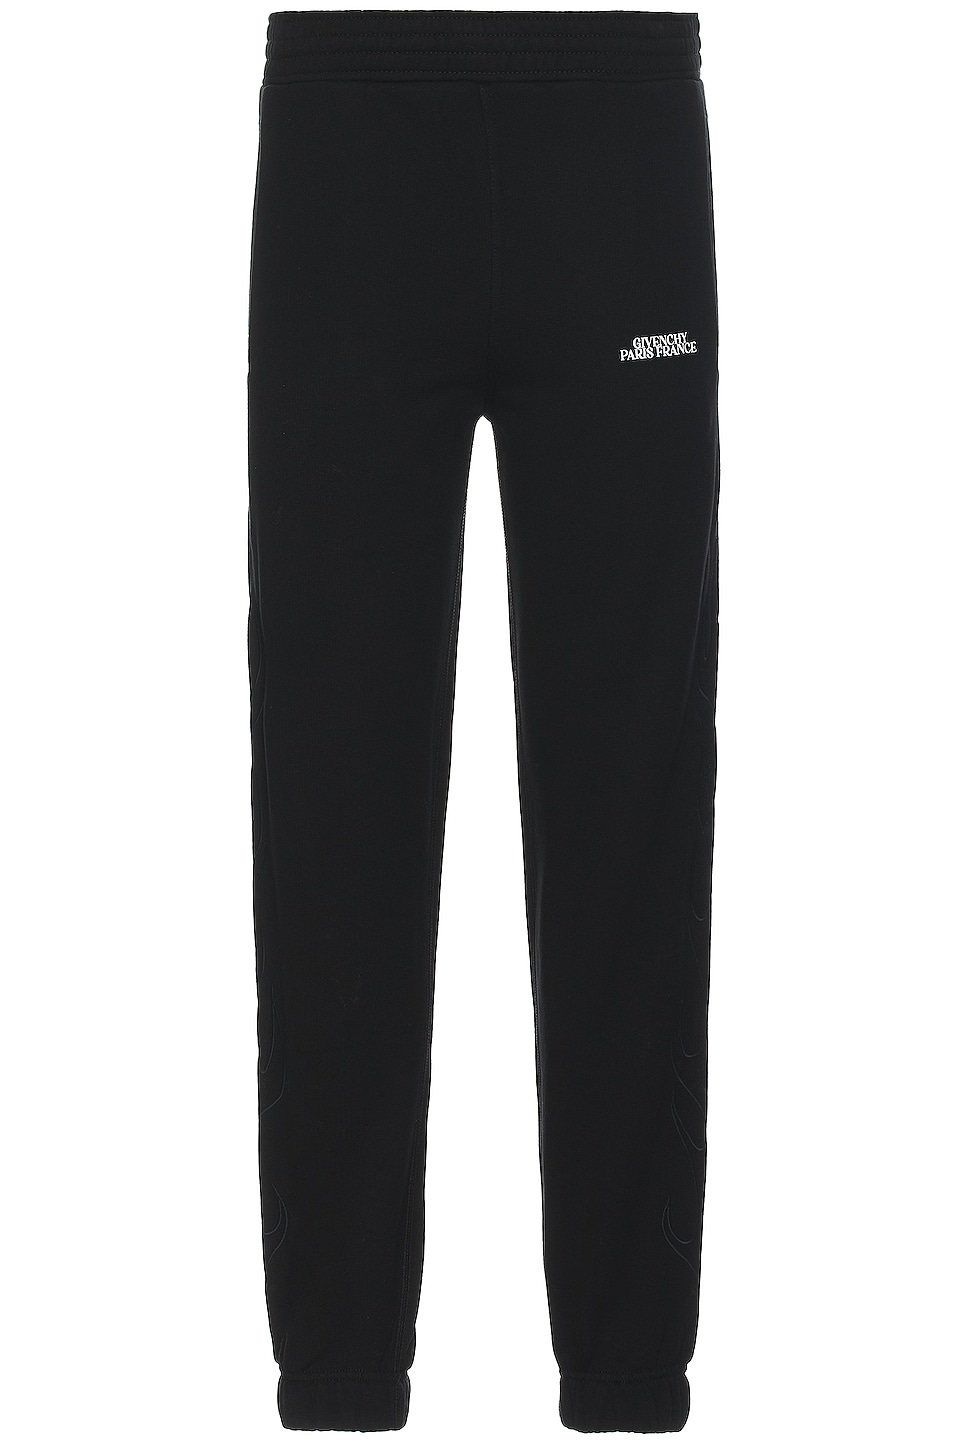 Image 1 of Givenchy Slim Fit Jogging Sweat Pant in Black